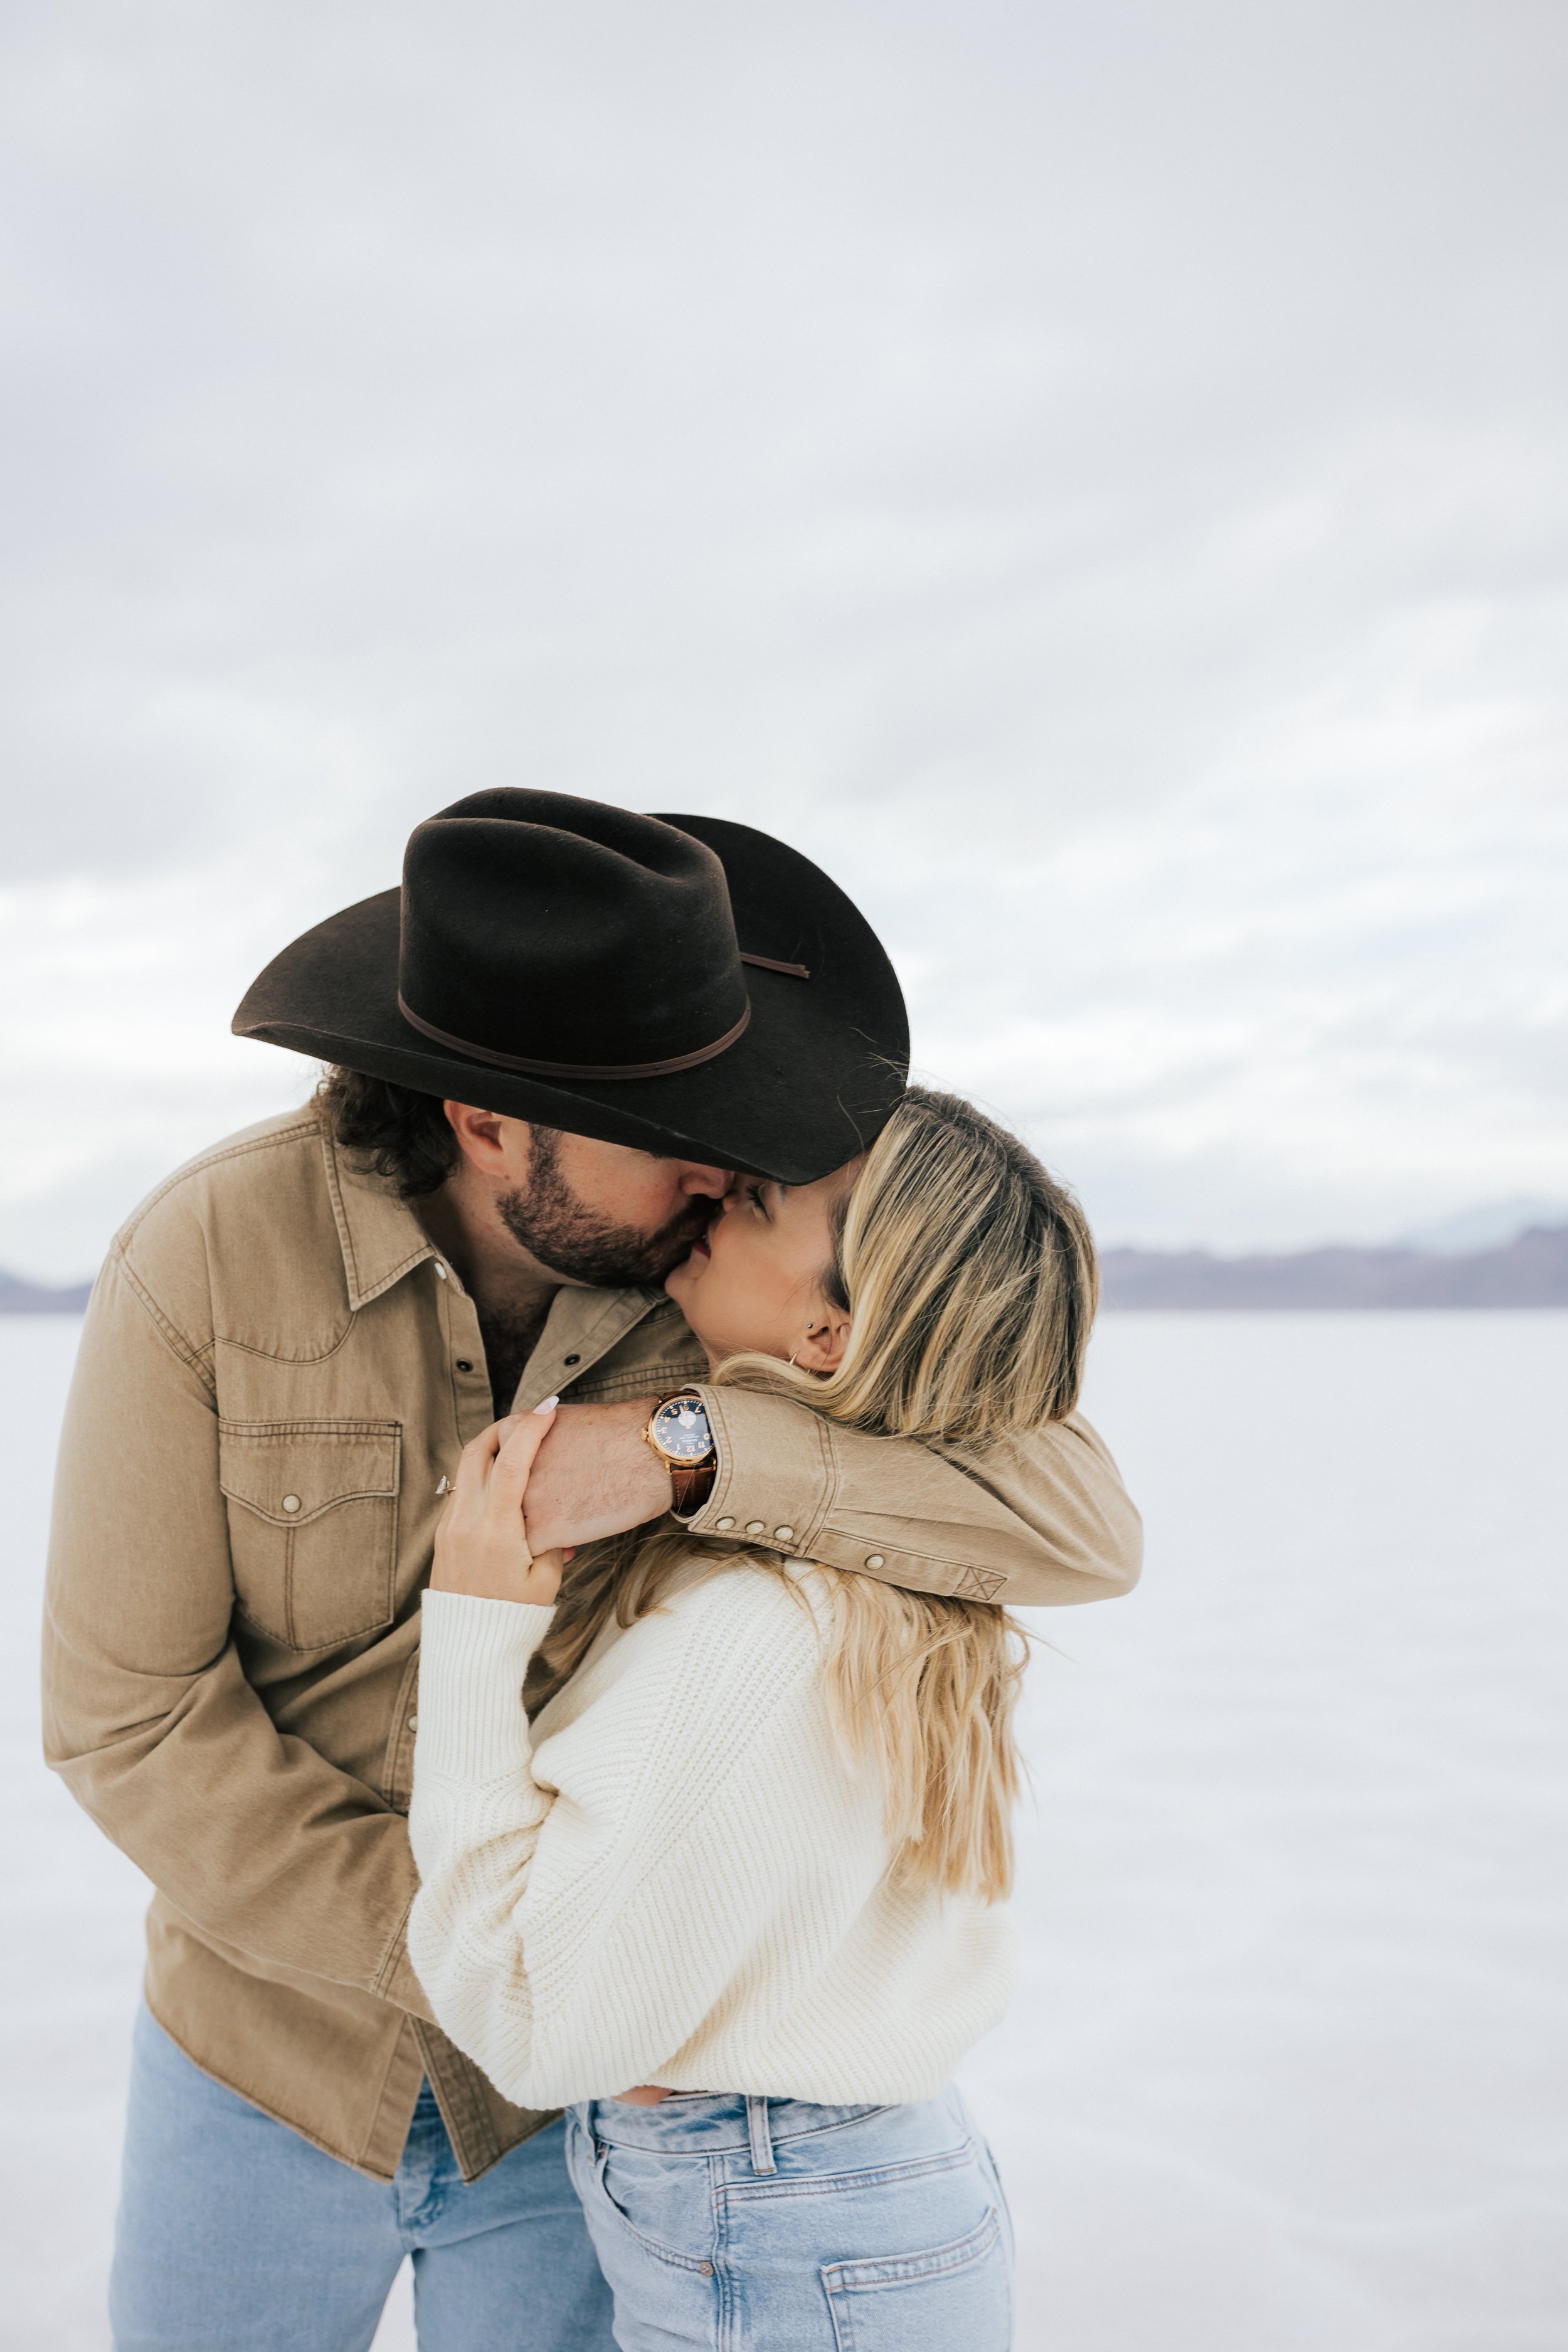  An engaged couple kisses and hugs as they pose for a photo at the Bonneville Salt Flats near Wendover, Nevada and Salt Lake City, Utah. The Salt Flats are white and the sky is overcast. The mountains show behind. Engagement session at the Utah Salt 